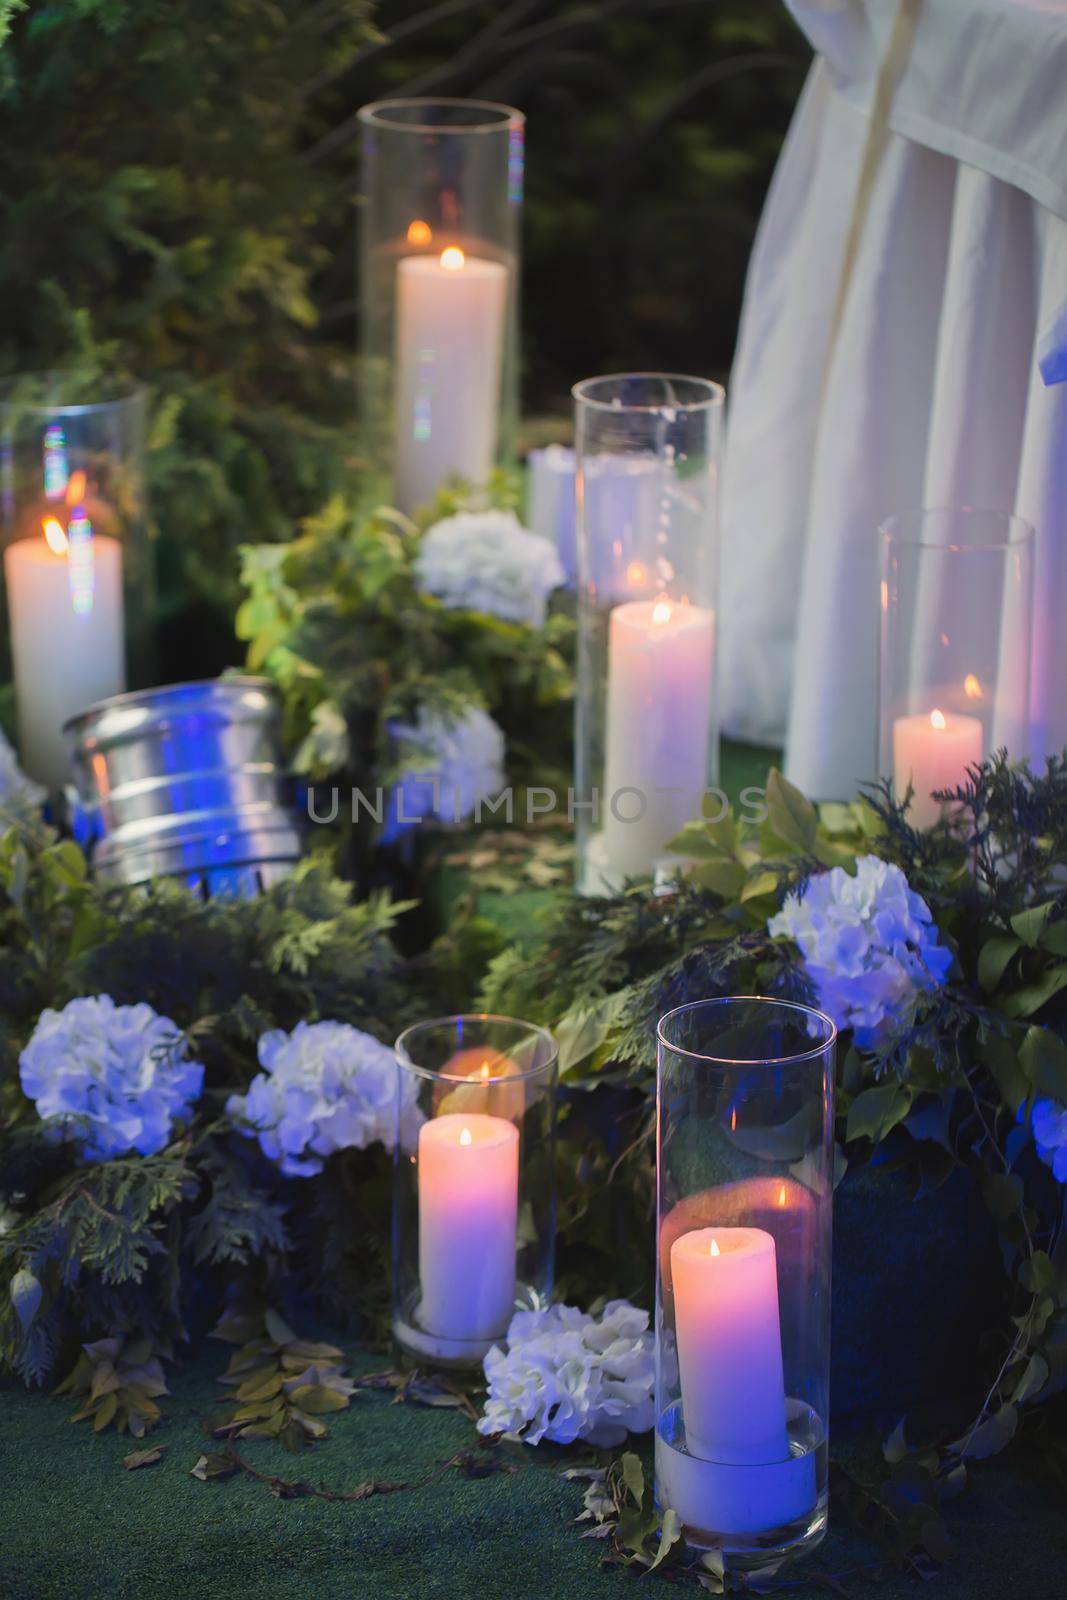 Arrangement of flowers, candles and green plants